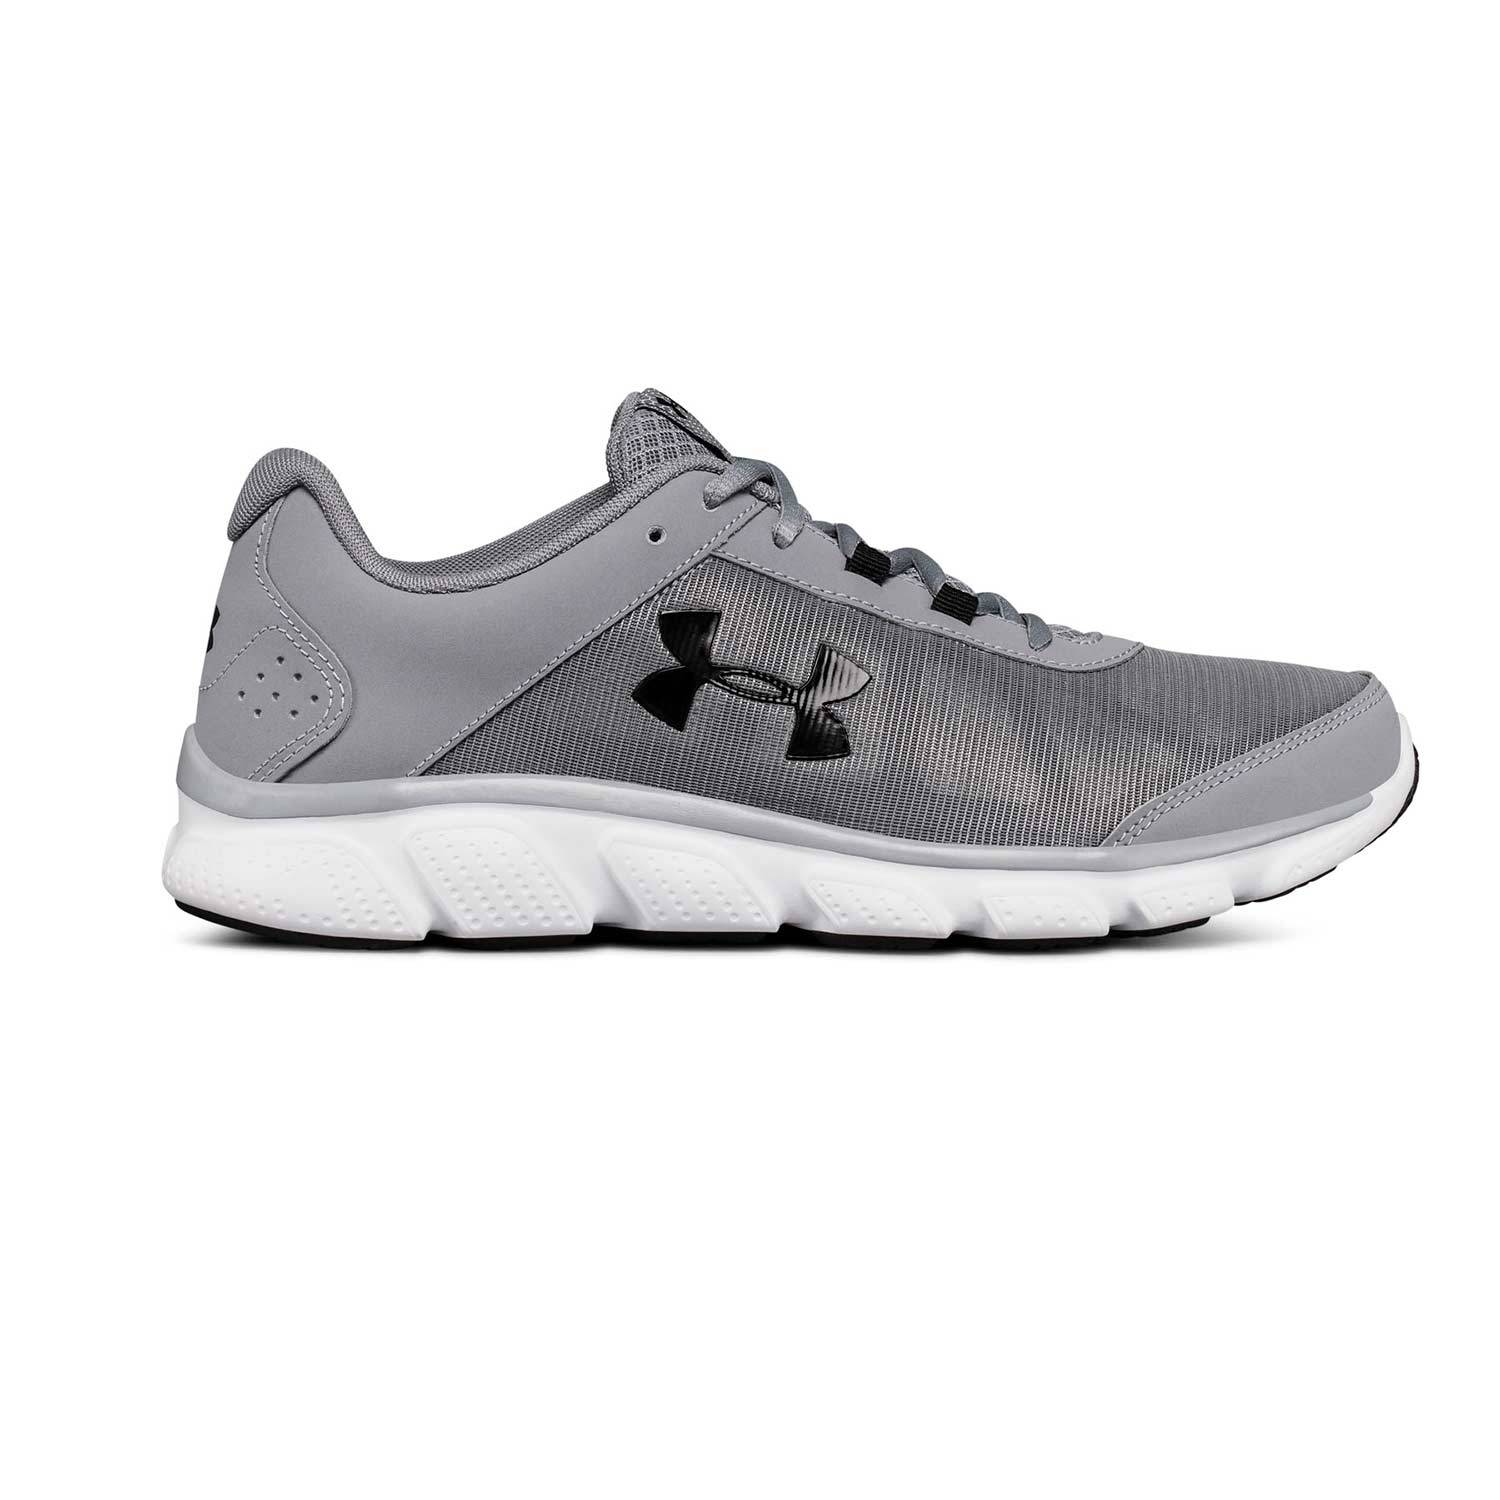 Black/Grey, Size 7 Big Kid Details about   Under Armour Boys’ Micro G Spine Disrupt 1292849001 